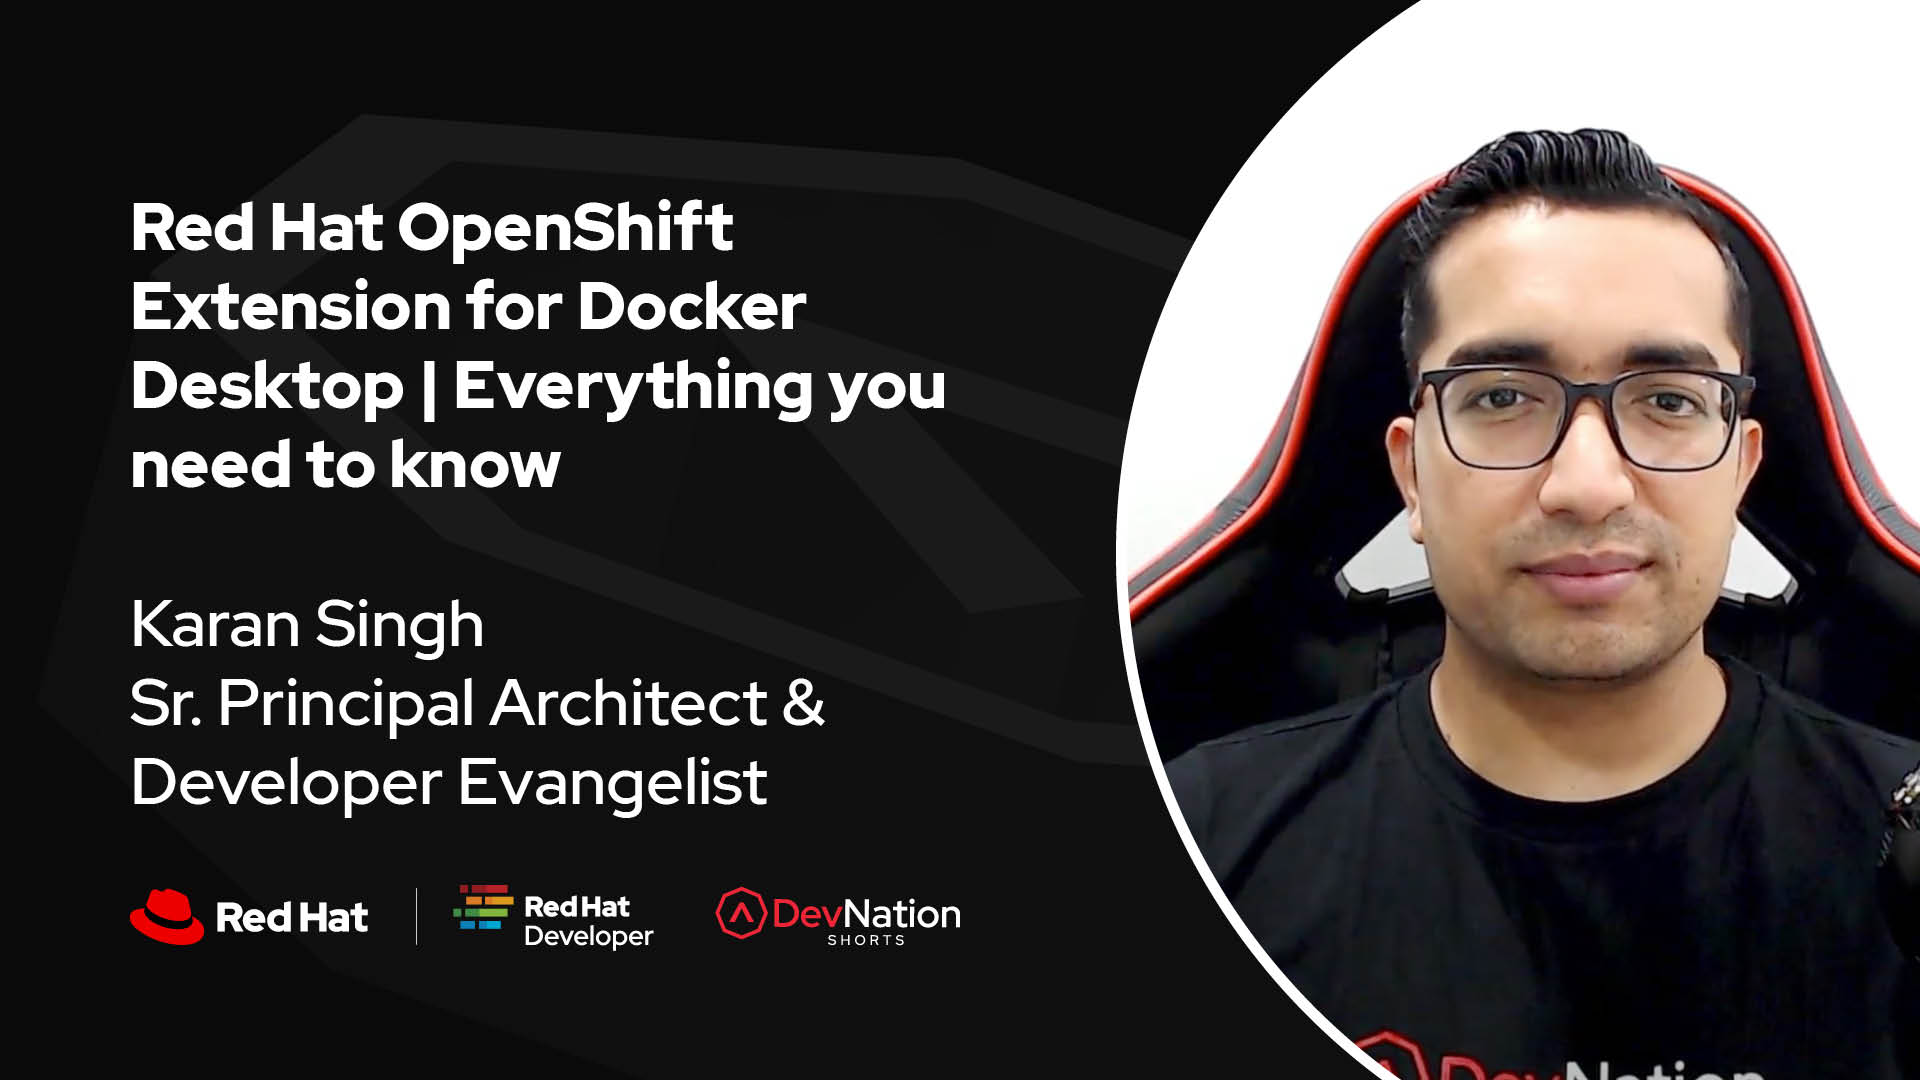 Red Hat OpenShift Extension for Docker Desktop | Everything you need to know